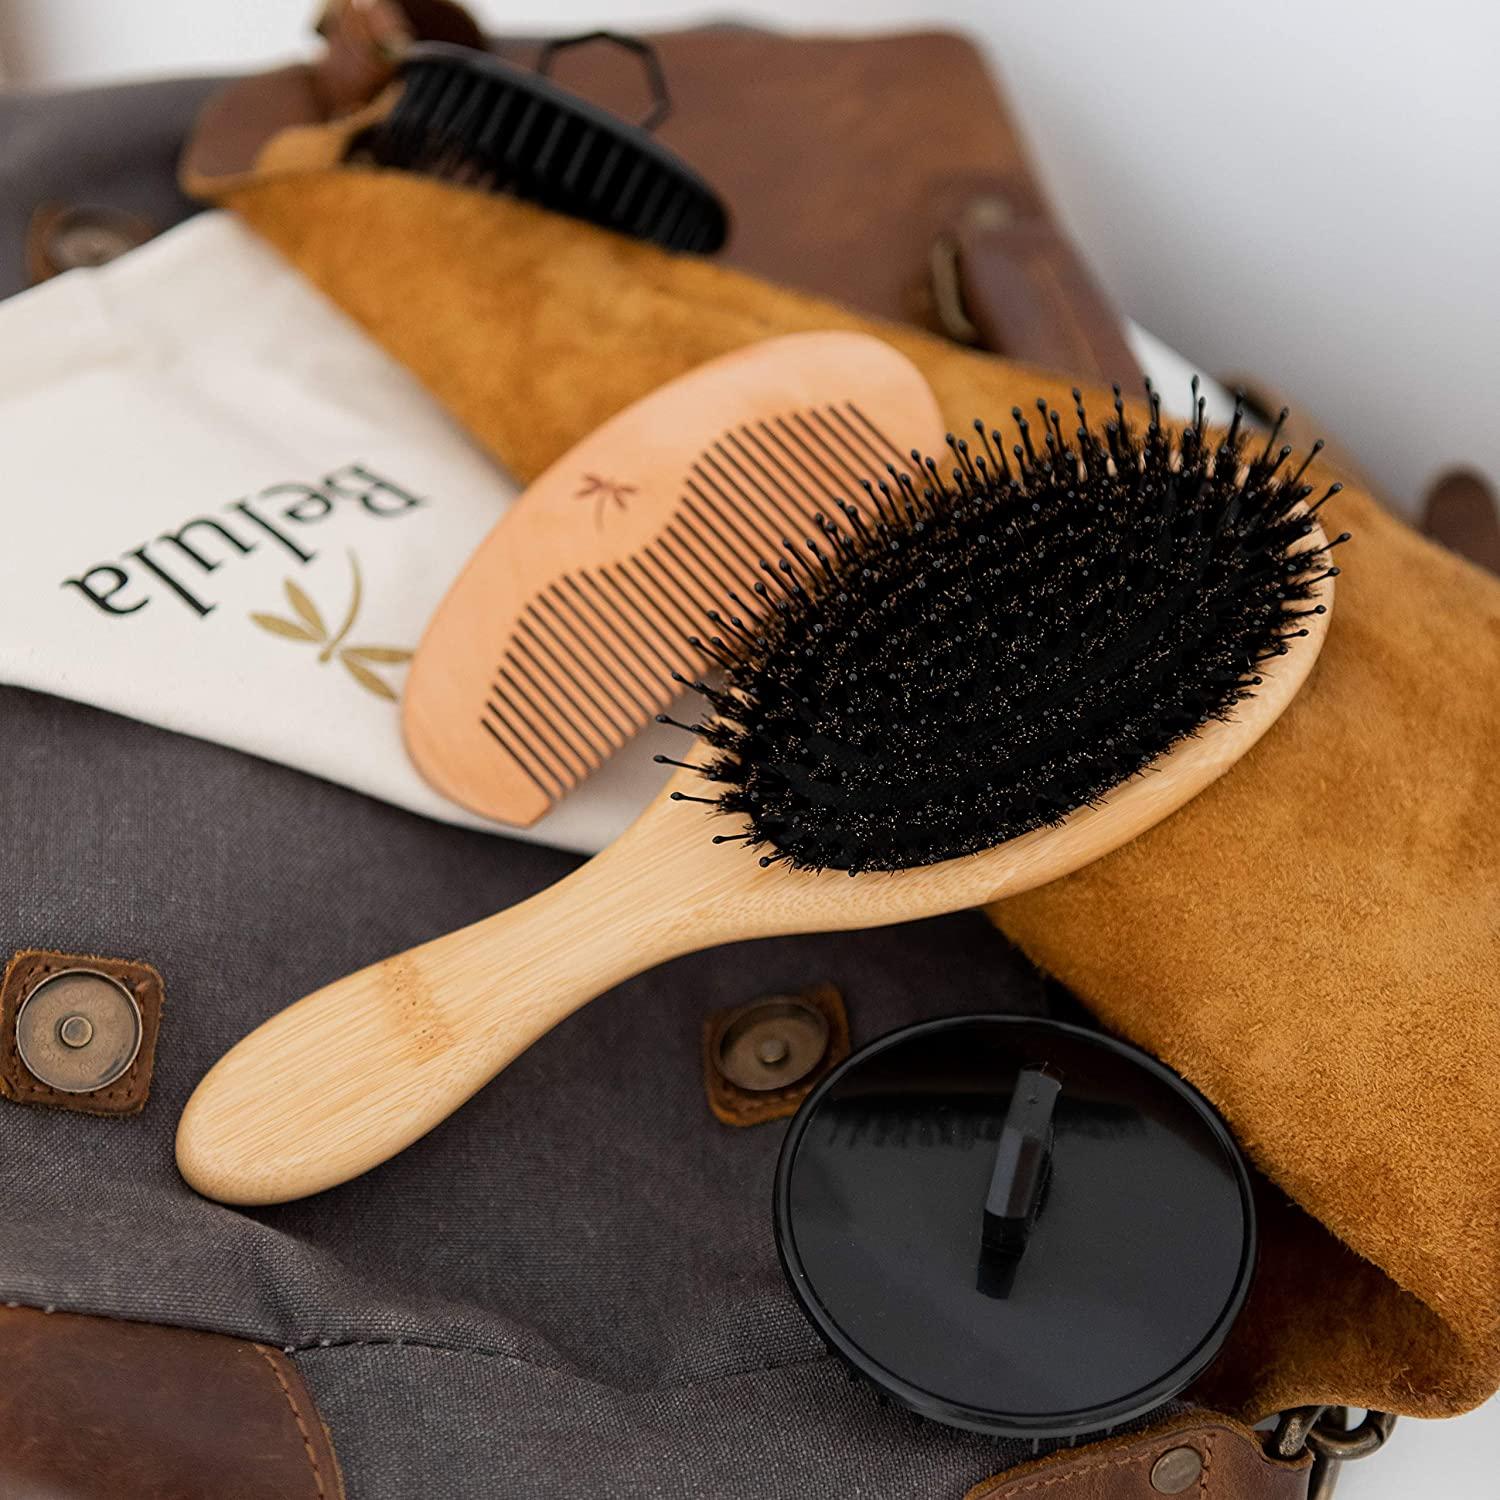 Belula 100% Boar Bristle Hair Brush for Men Set. Soft Hairbrush for Thin,  Normal and Short Hair. Boar Bristle Brush and Wooden Comb for Men. Free 2 x